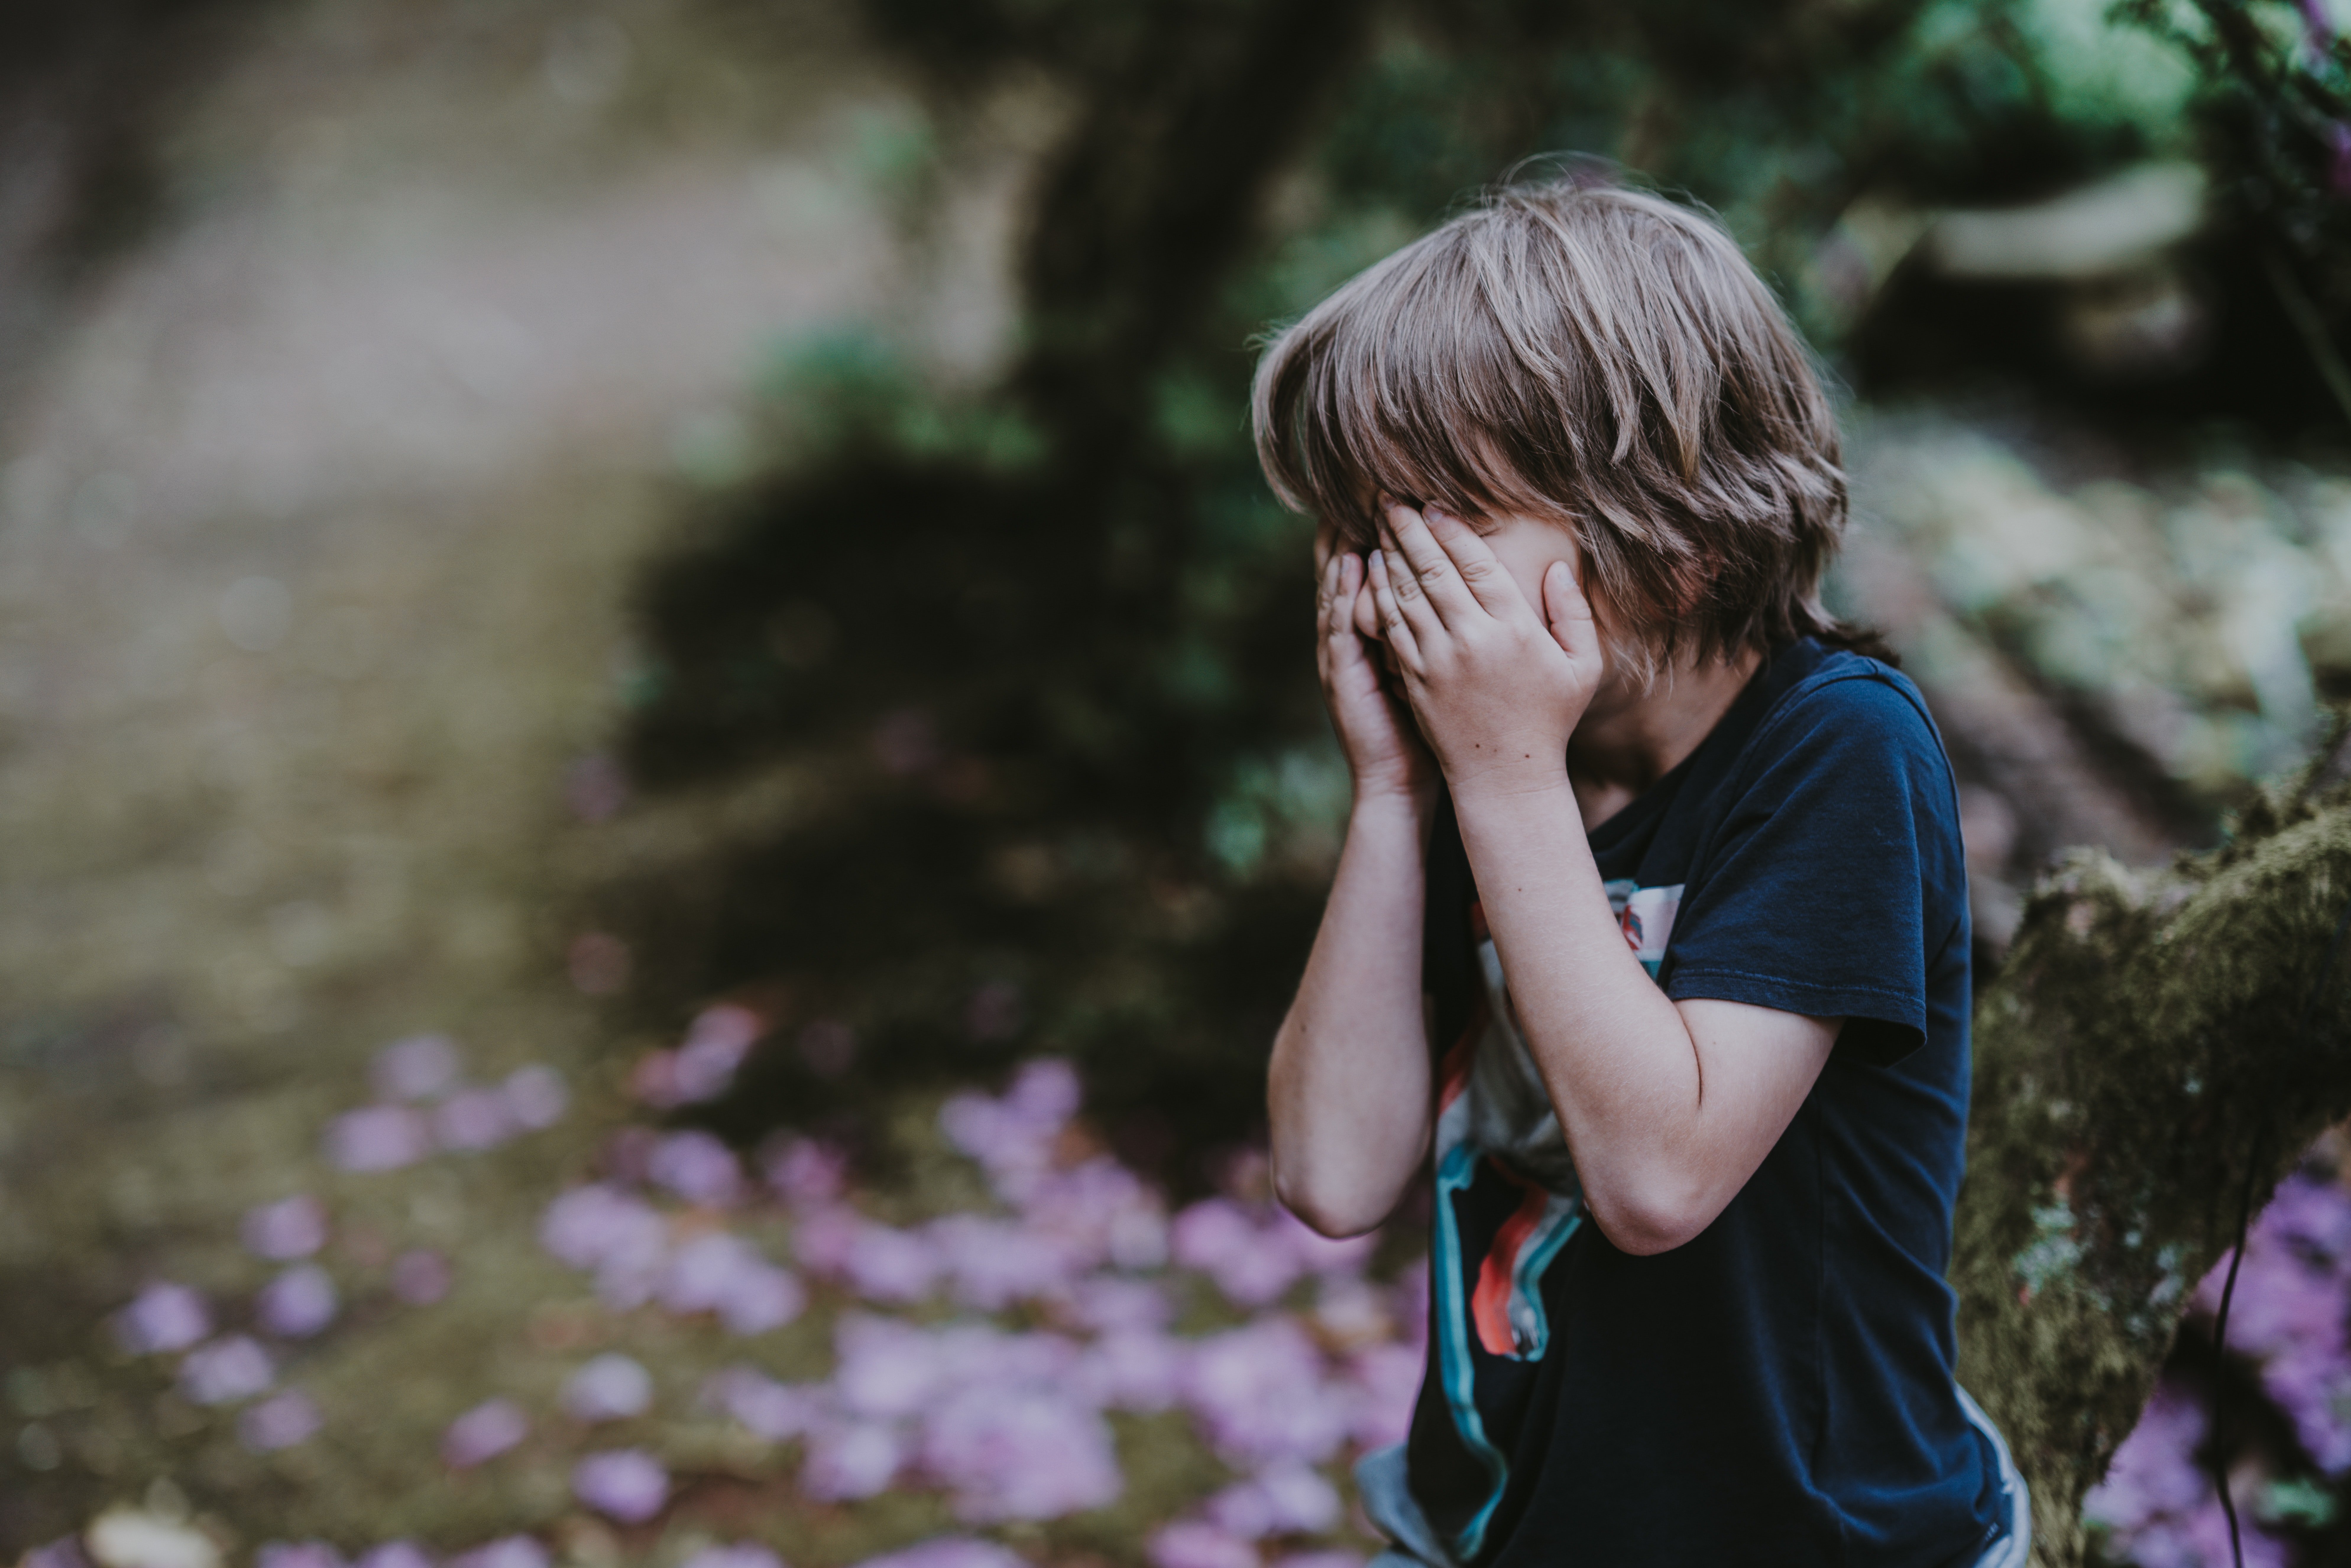 Another user believed people shouldn't be nosy if they see a child crying | Source: Unsplash